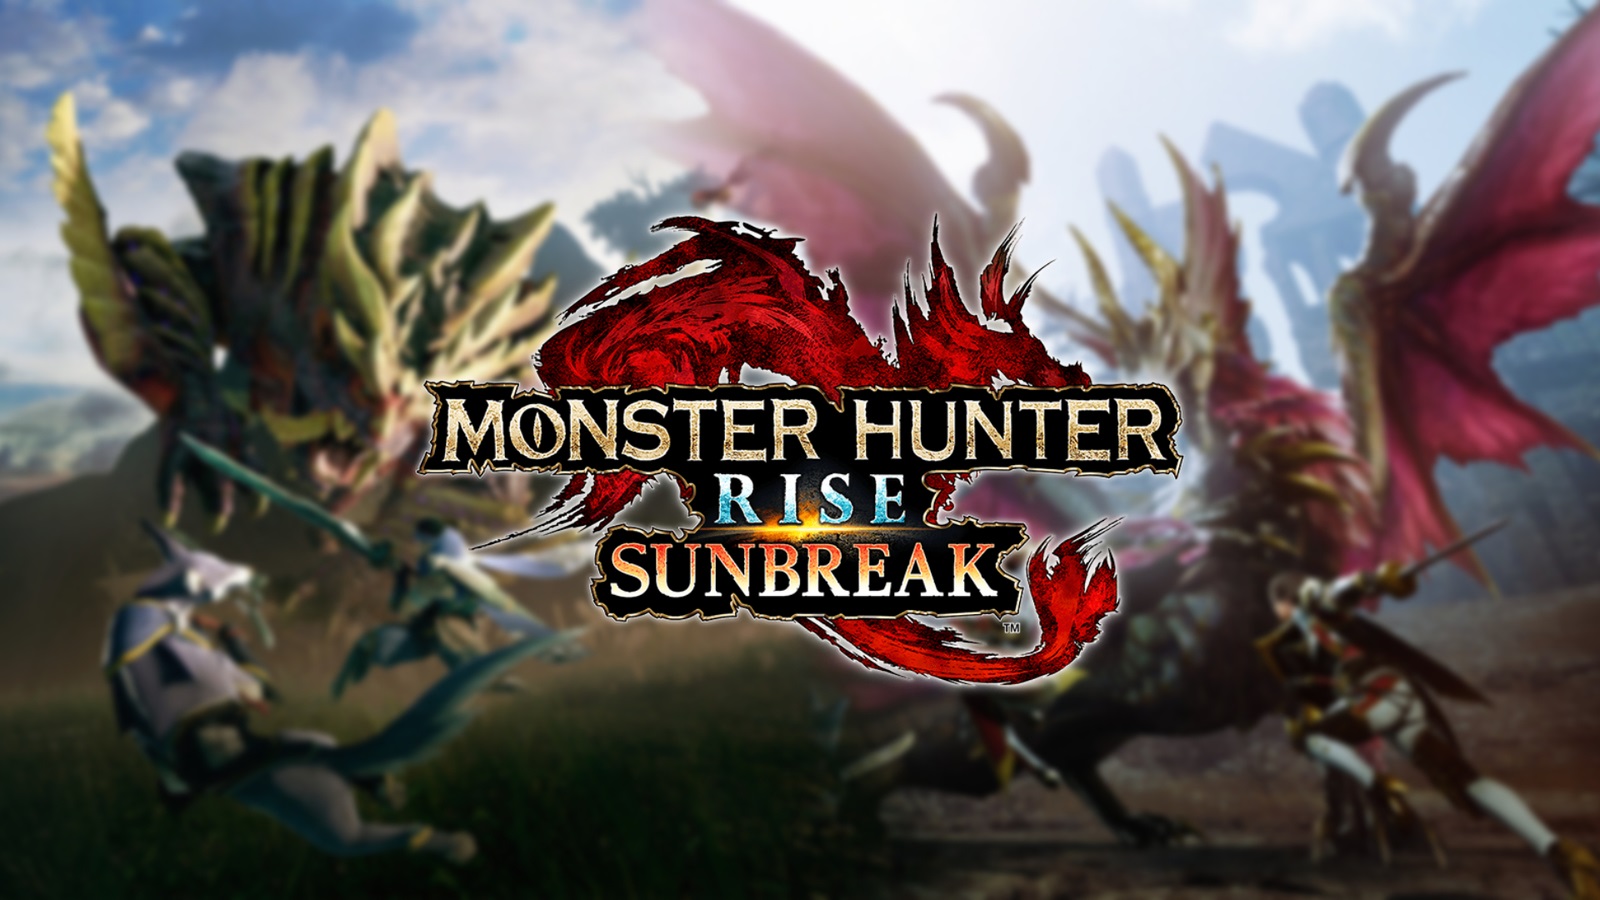 A hotfix is coming to address Monster Hunter Rise’s Steam Deck issues